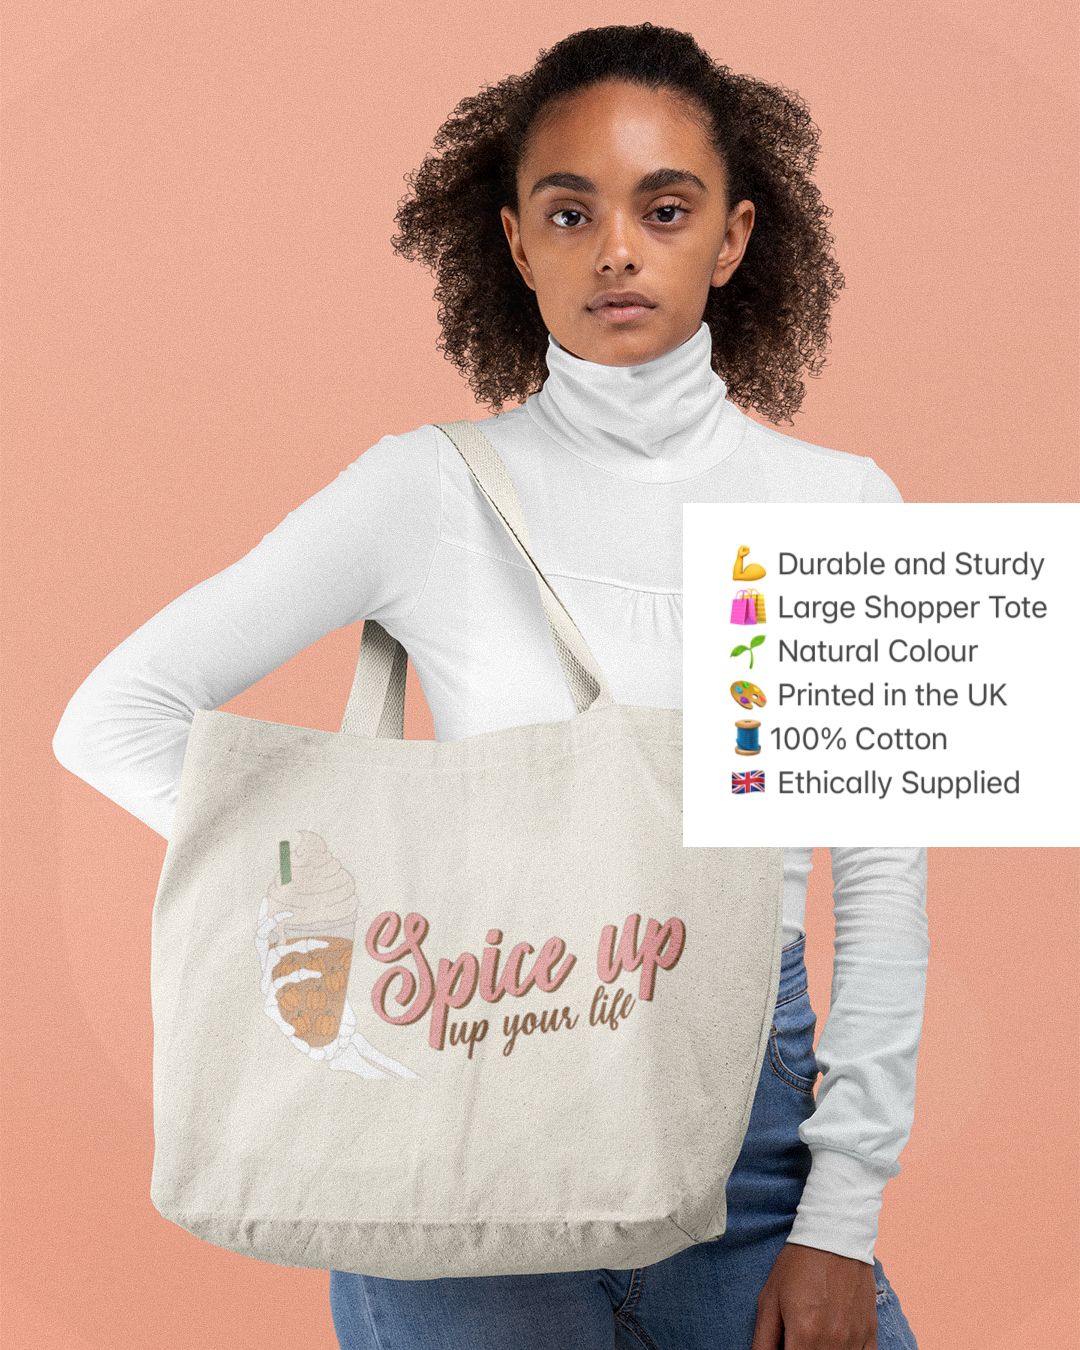 Spice Up Your Life Tote Bag - Spooky Season Skeleton's Hand Pumpkin Spiced Latte Tote Bag - Halloween Pumpkin Spiced Latte Shopper Tote Bag - Pumpkin Spiced Latte Tote Bag Shopper